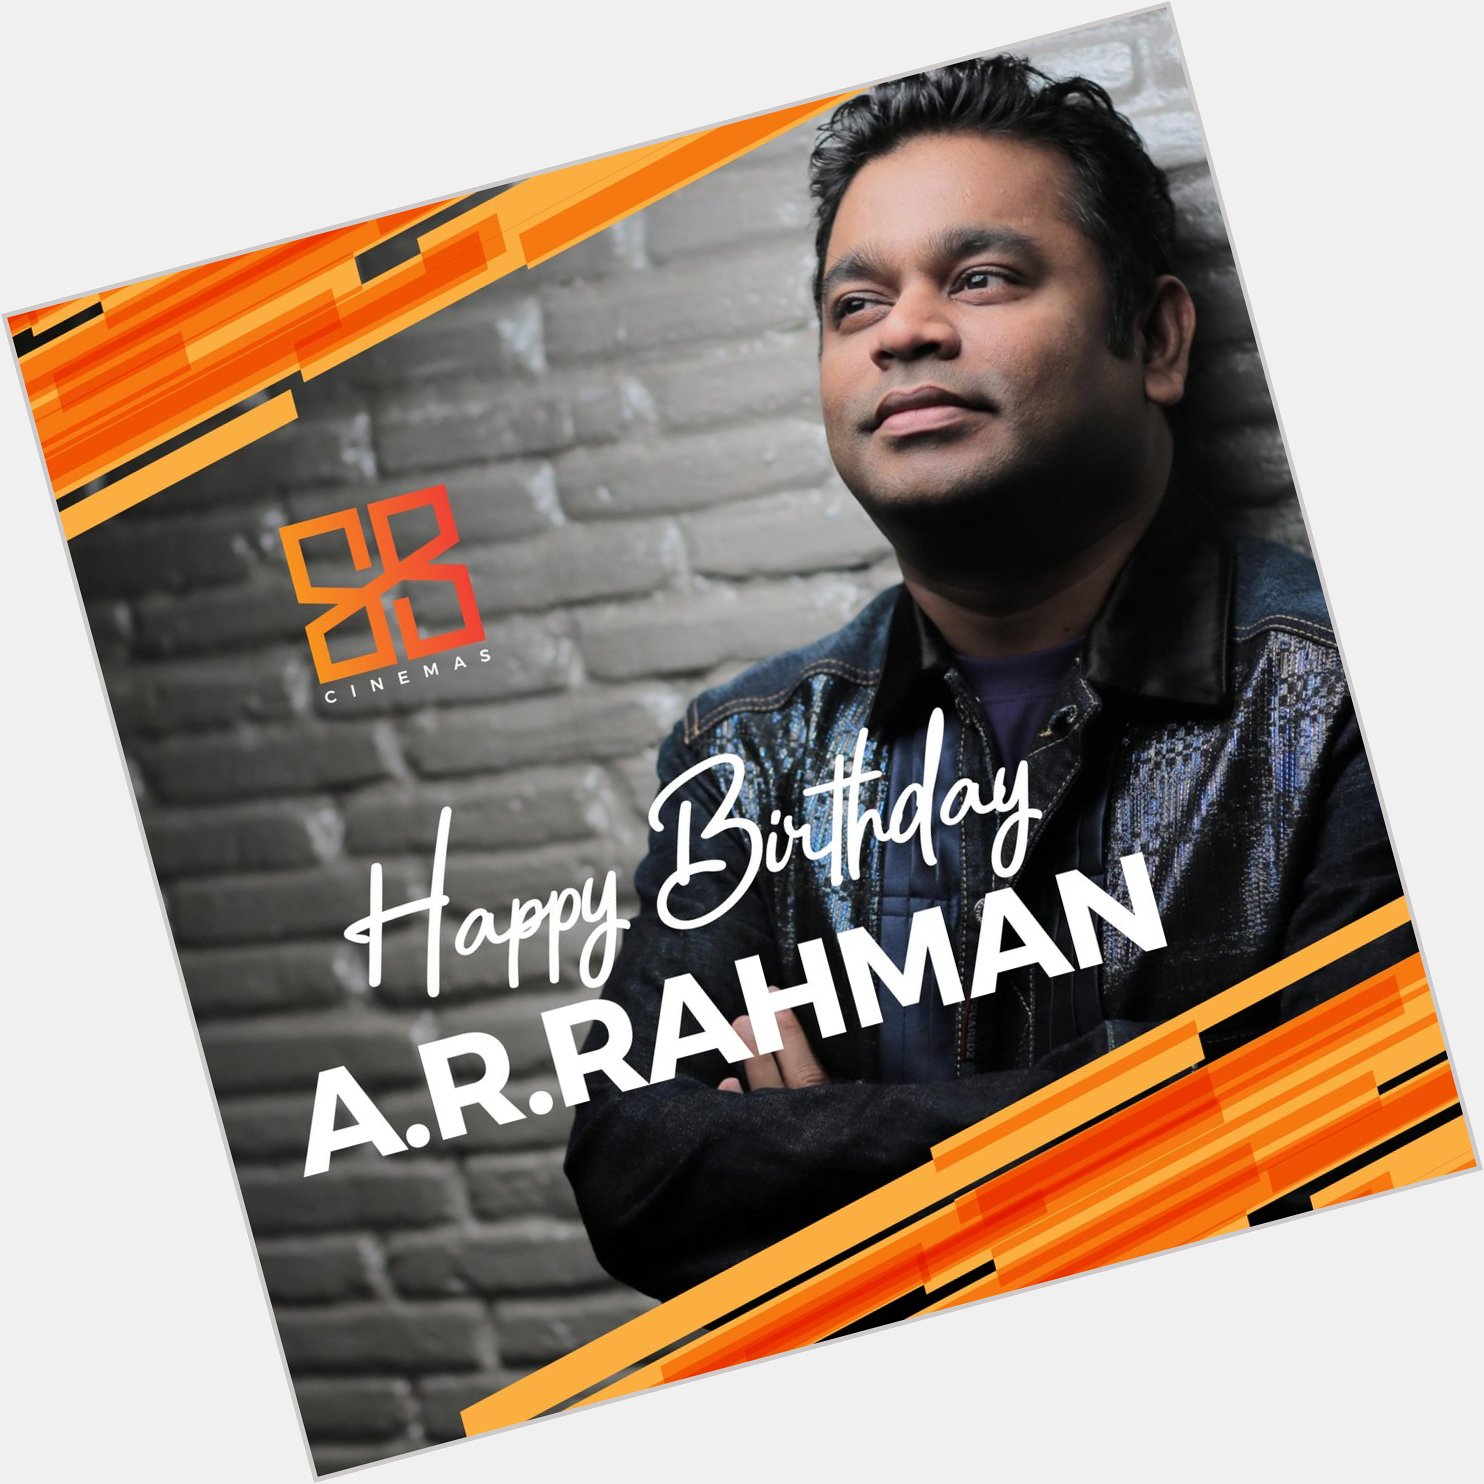 Happy birthday to the ruler of our playlists A.R.Rahman!   